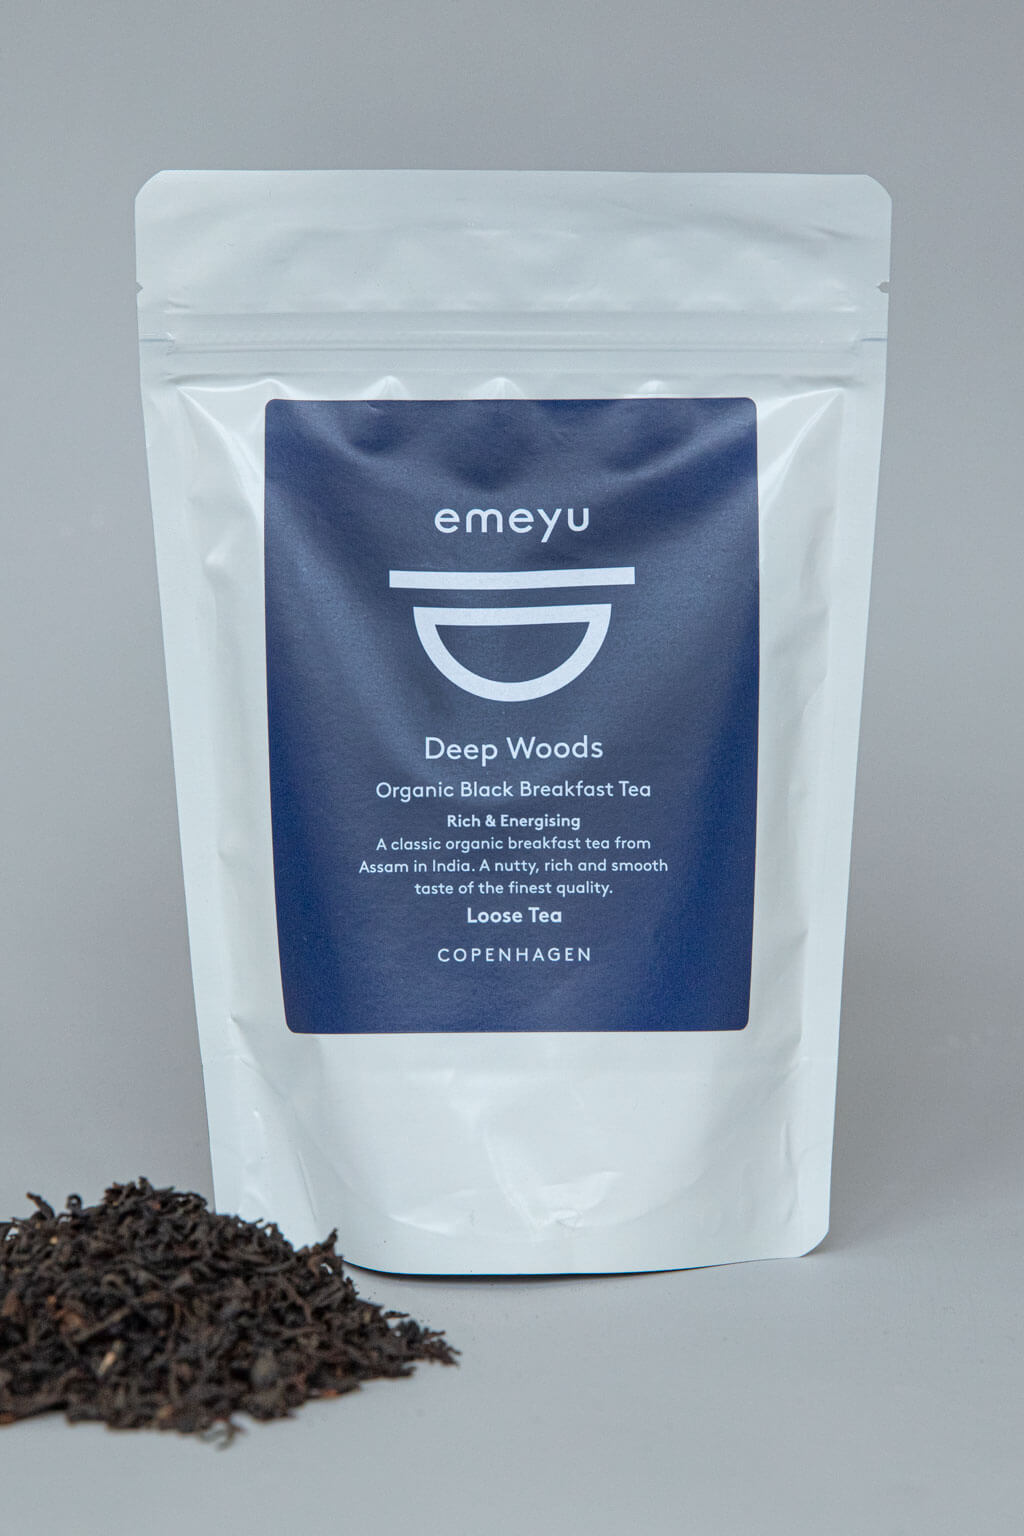 Emeyu’s Deep Woods is a classic organic high quality Black Breakfast tea from Assam in India. A rich, smooth taste and energizing with caffeine. Can be taken with or without milk. 80 g loose tea in a resealable and sustainable bag.